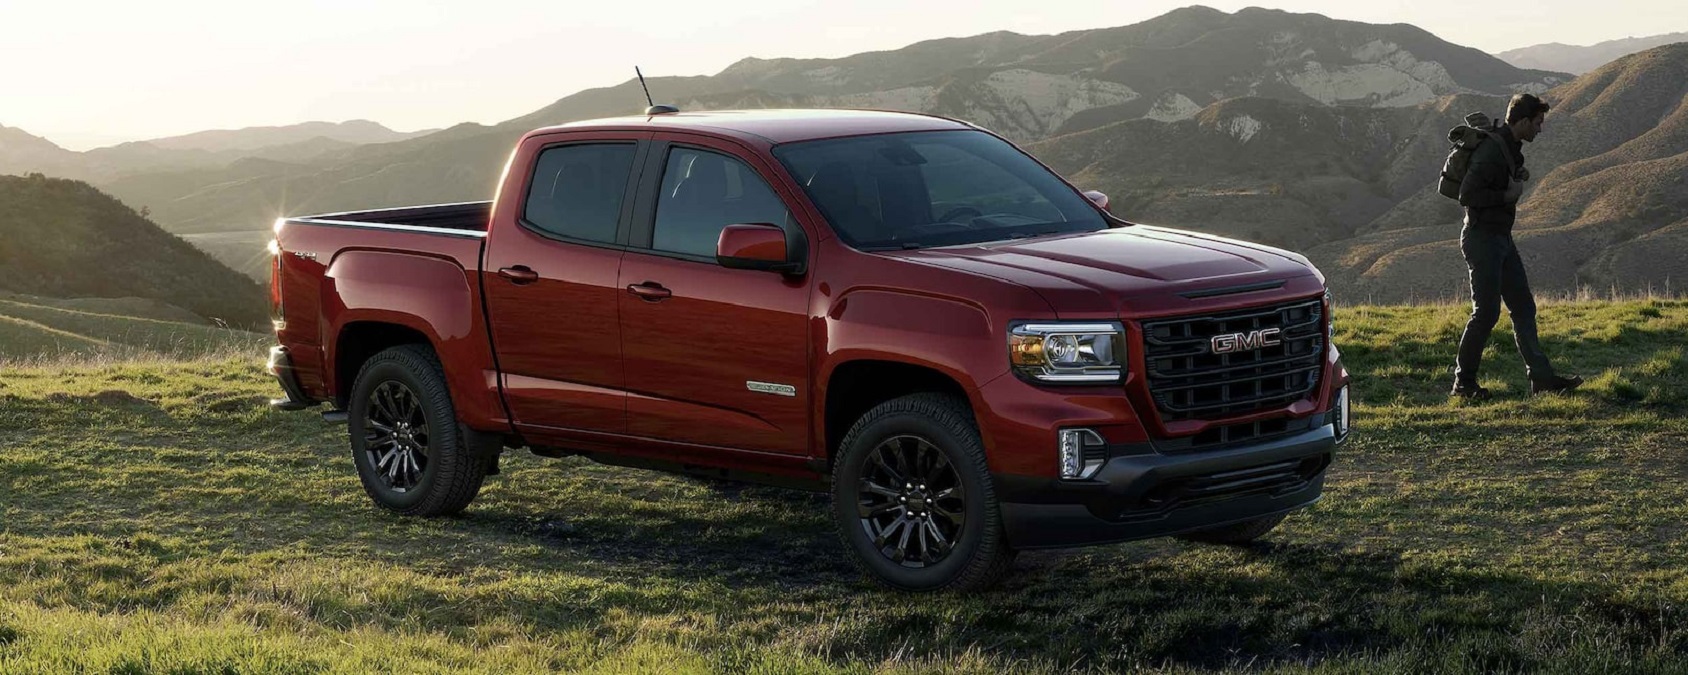 How Much Does a Fully Loaded 2022 GMC Canyon Cost?